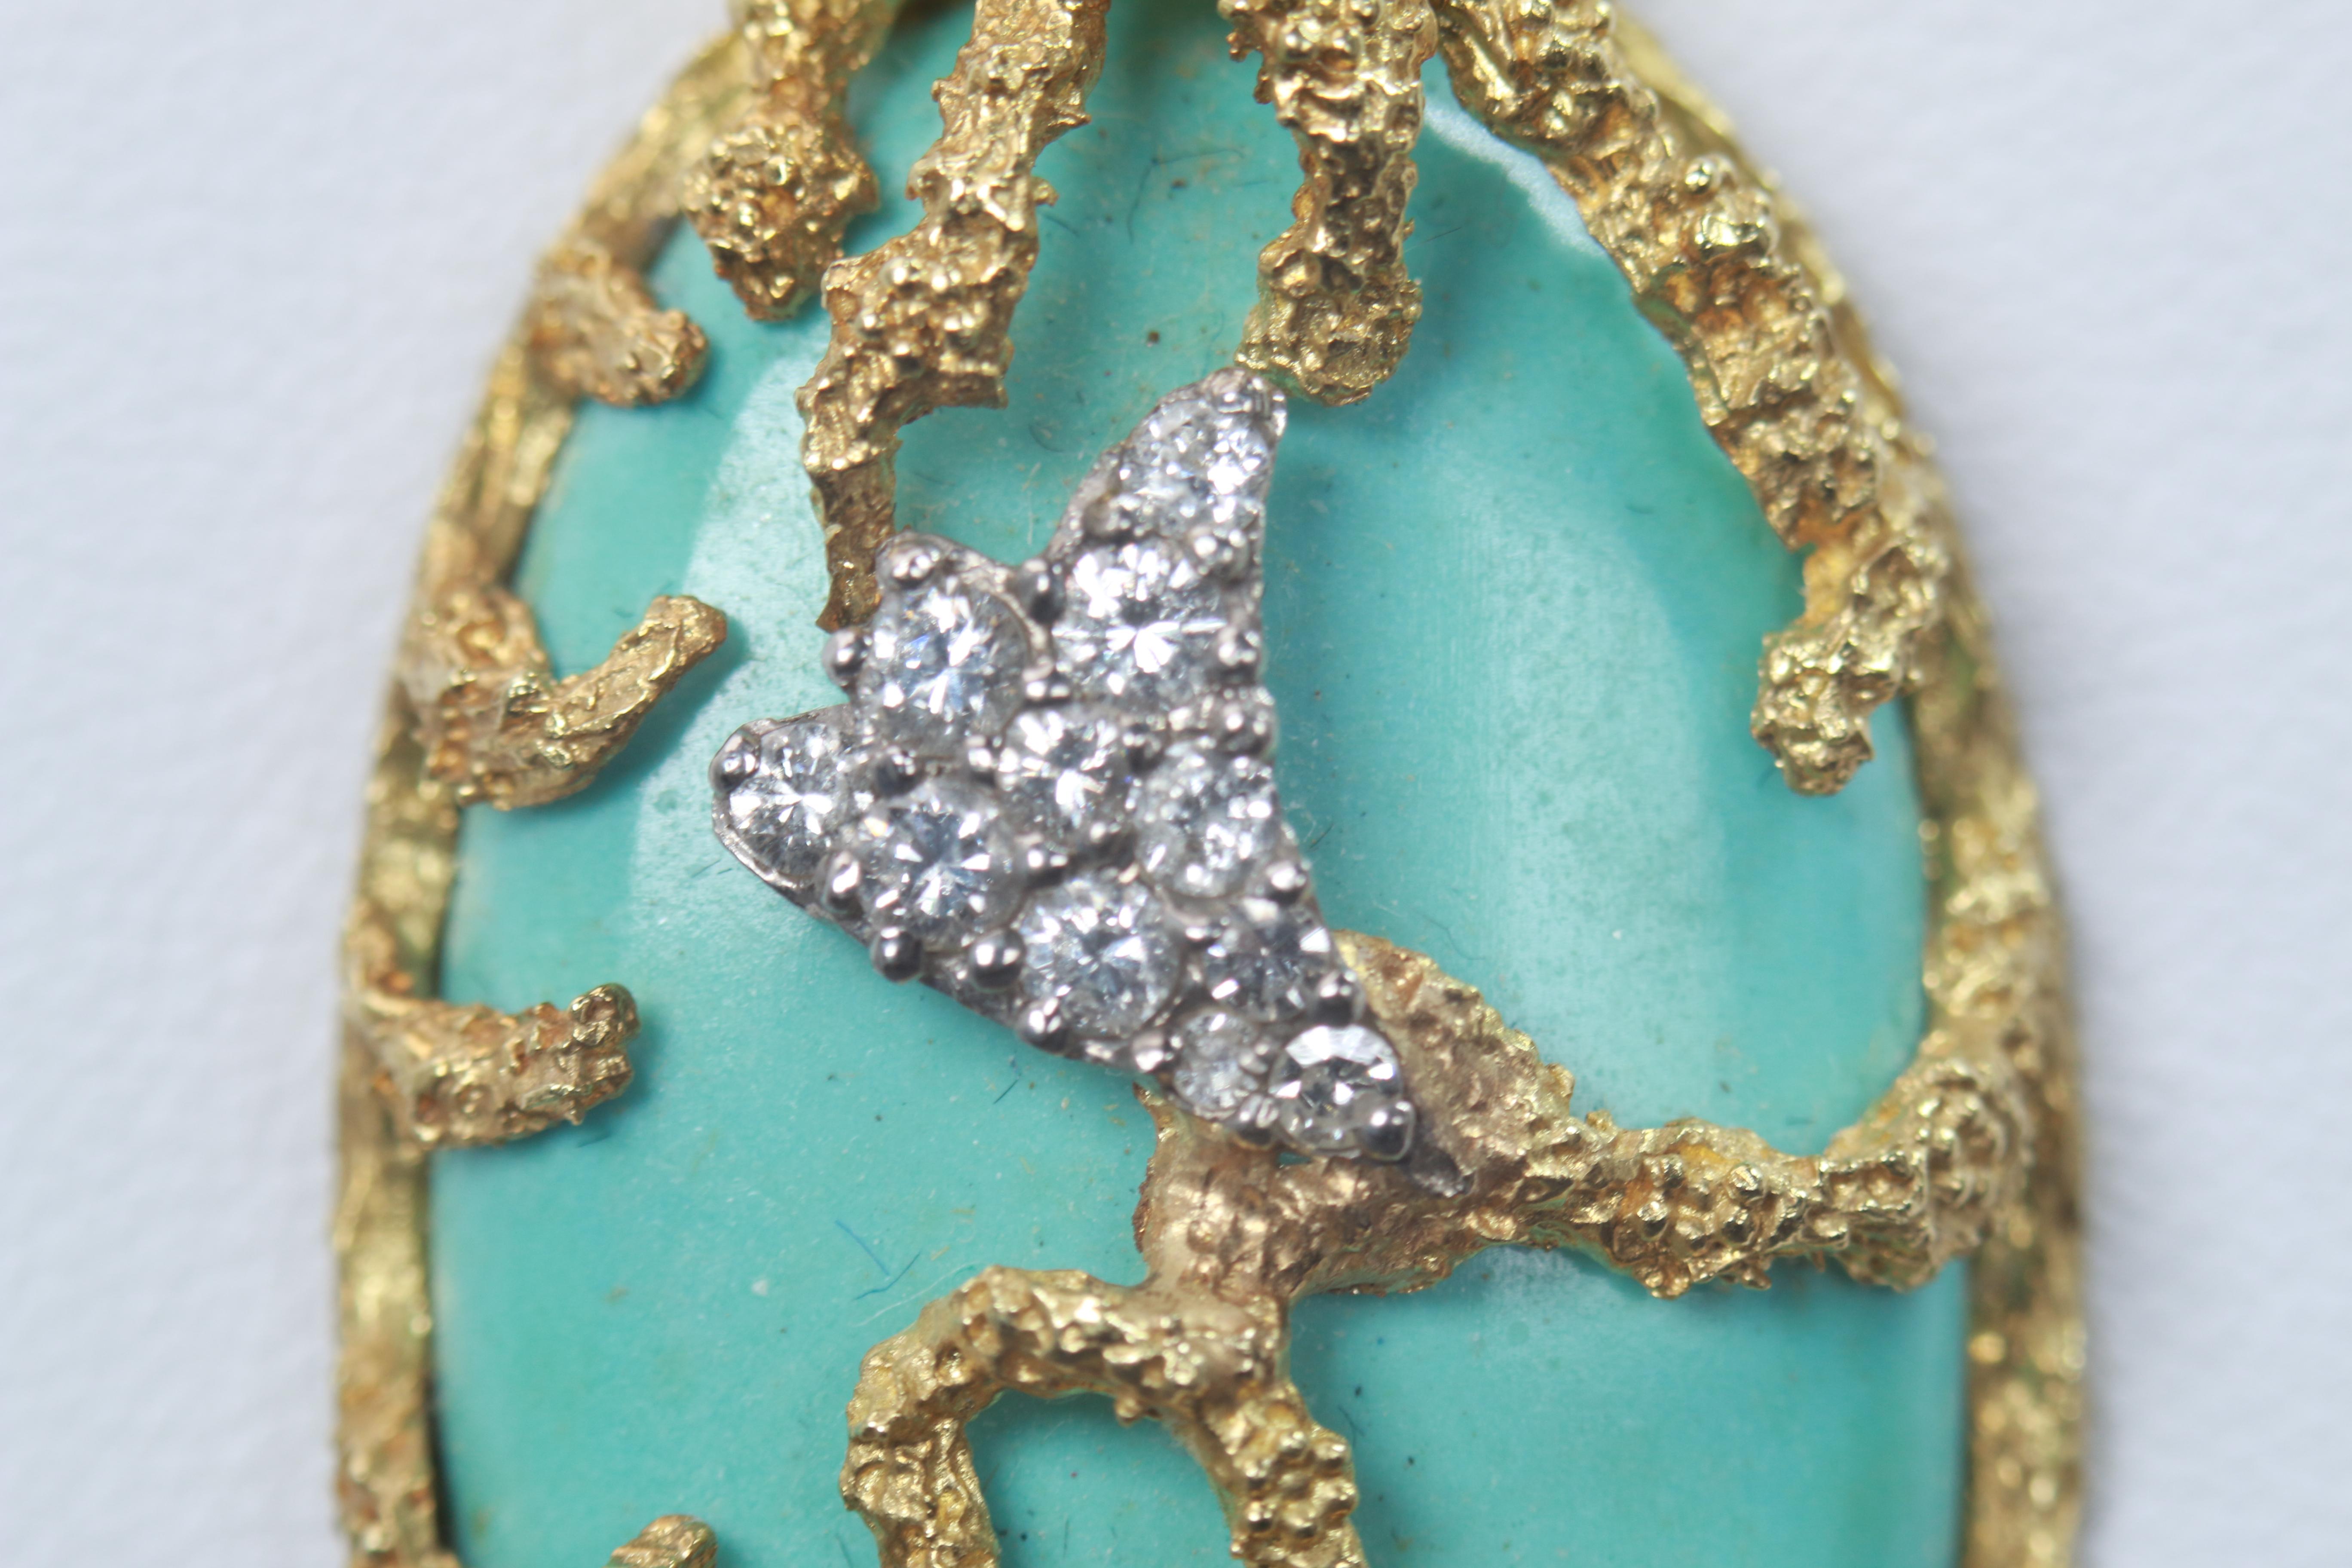 The rarity of this piece can not be understated, a gorgeous turquoise pendant set in 18k yellow gold with diamond embellishments.